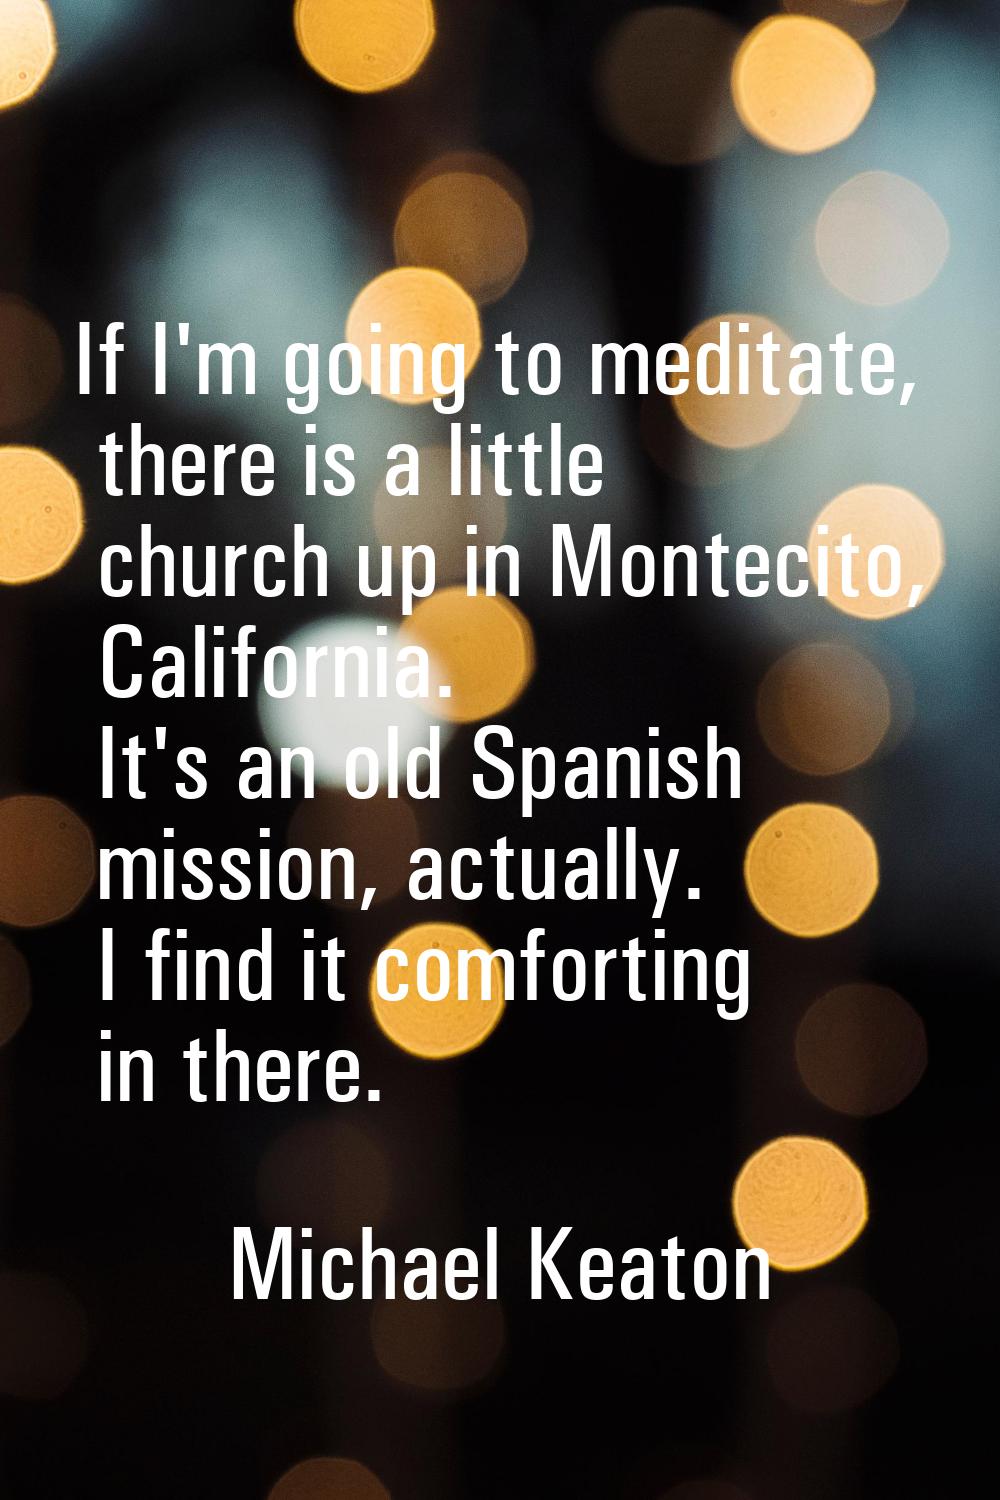 If I'm going to meditate, there is a little church up in Montecito, California. It's an old Spanish